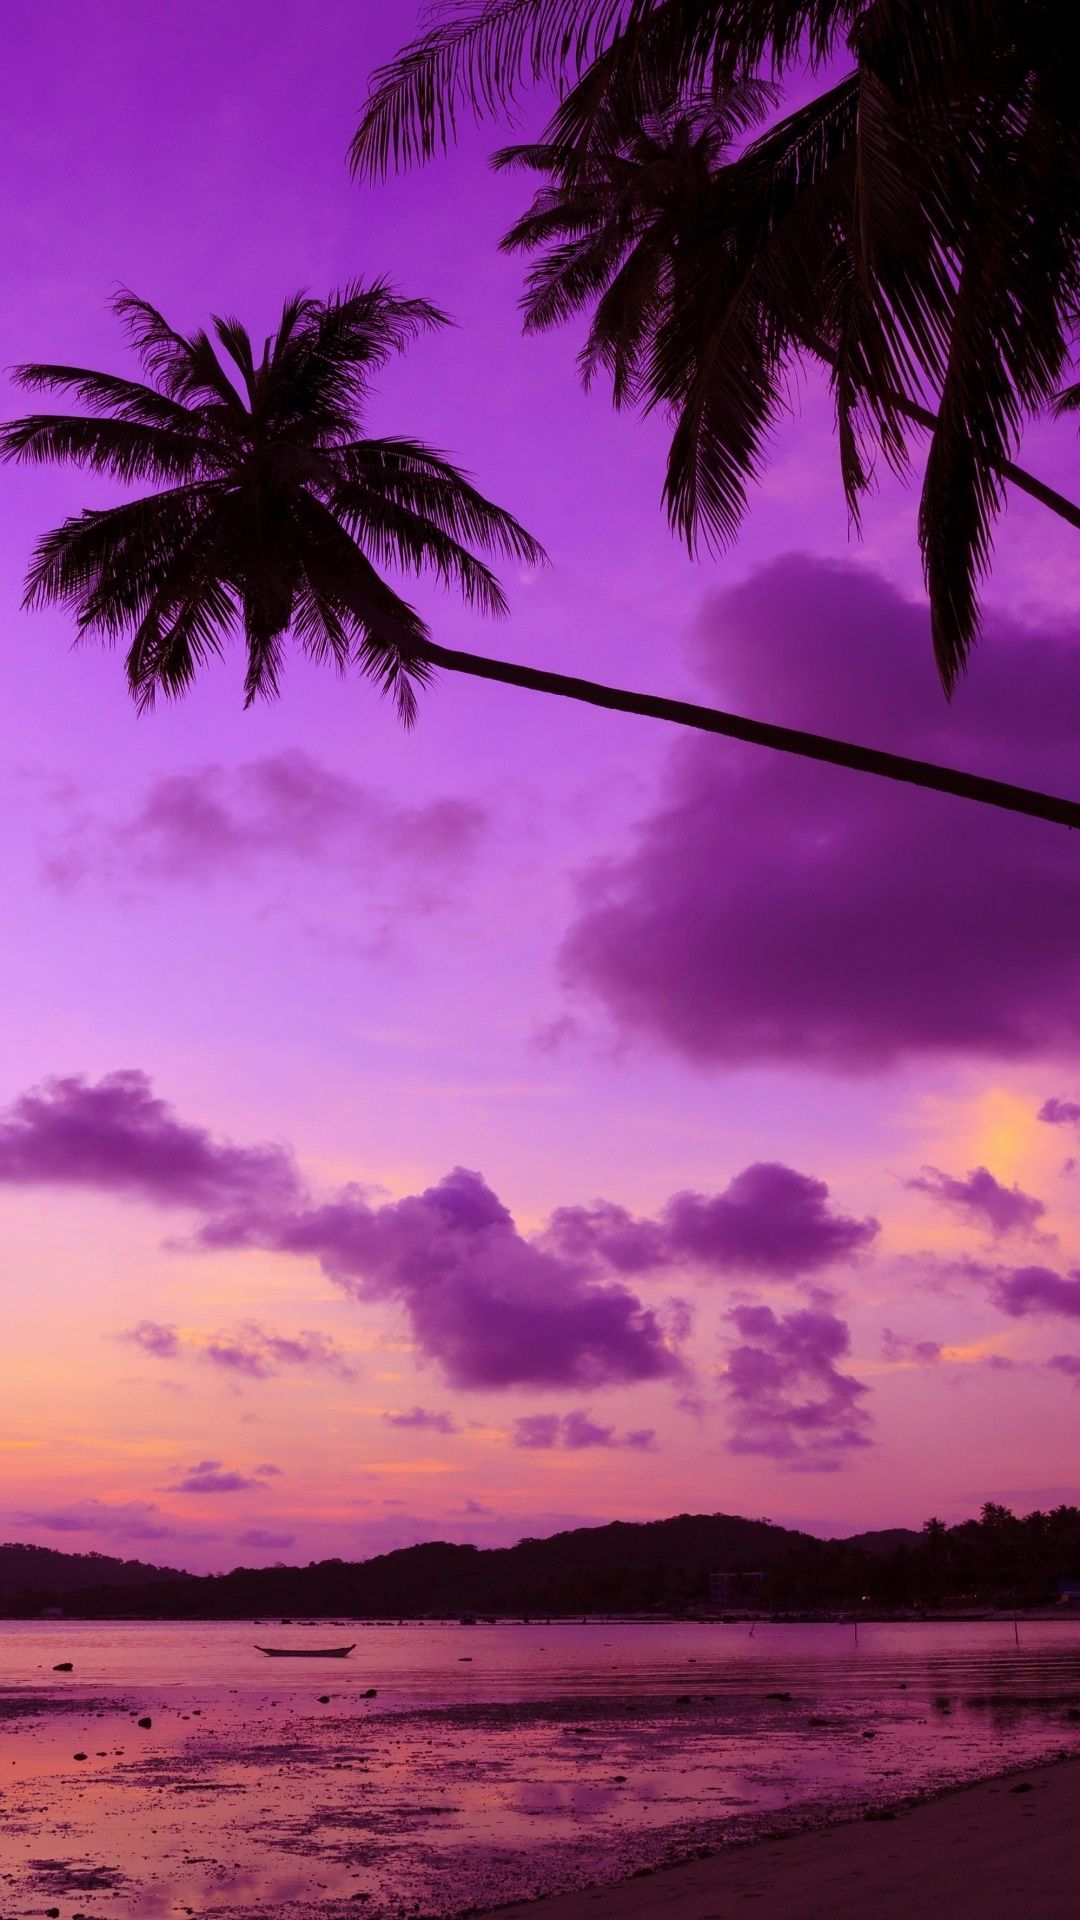 A purple sunset with palm trees in the foreground - Photography, sunset, palm tree